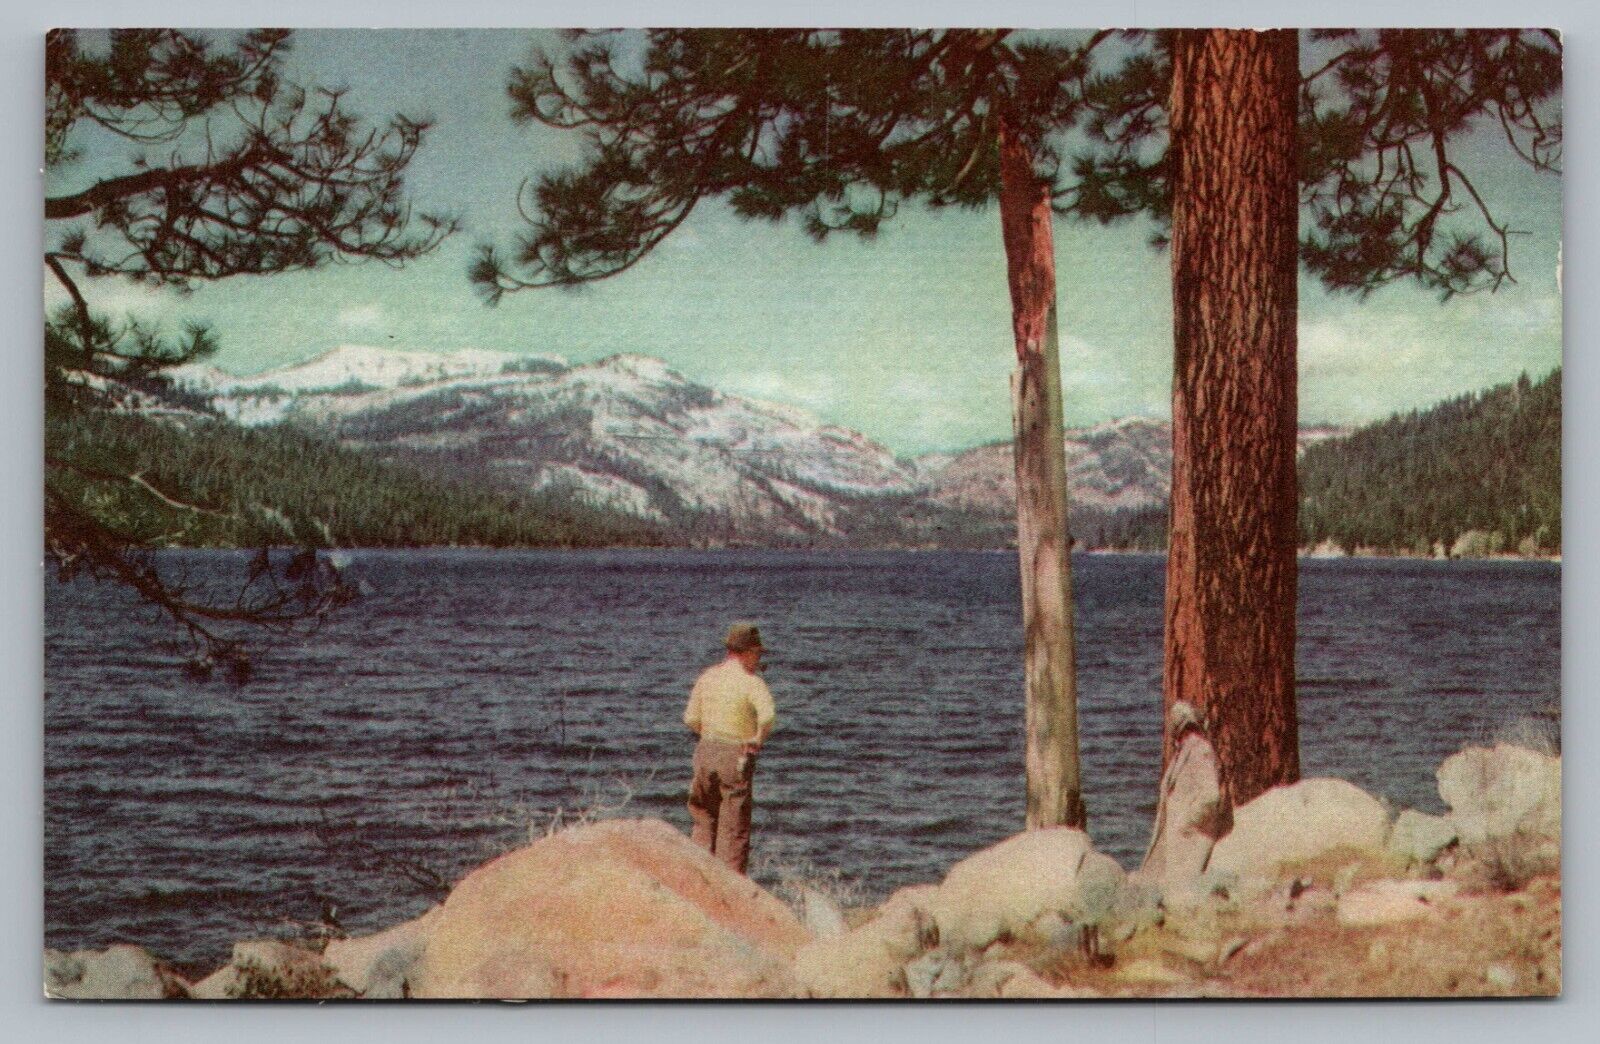 Donner Lake Union Oil 76 Gasoline West of Truckee CA Series 29 Postcard Vtg F7